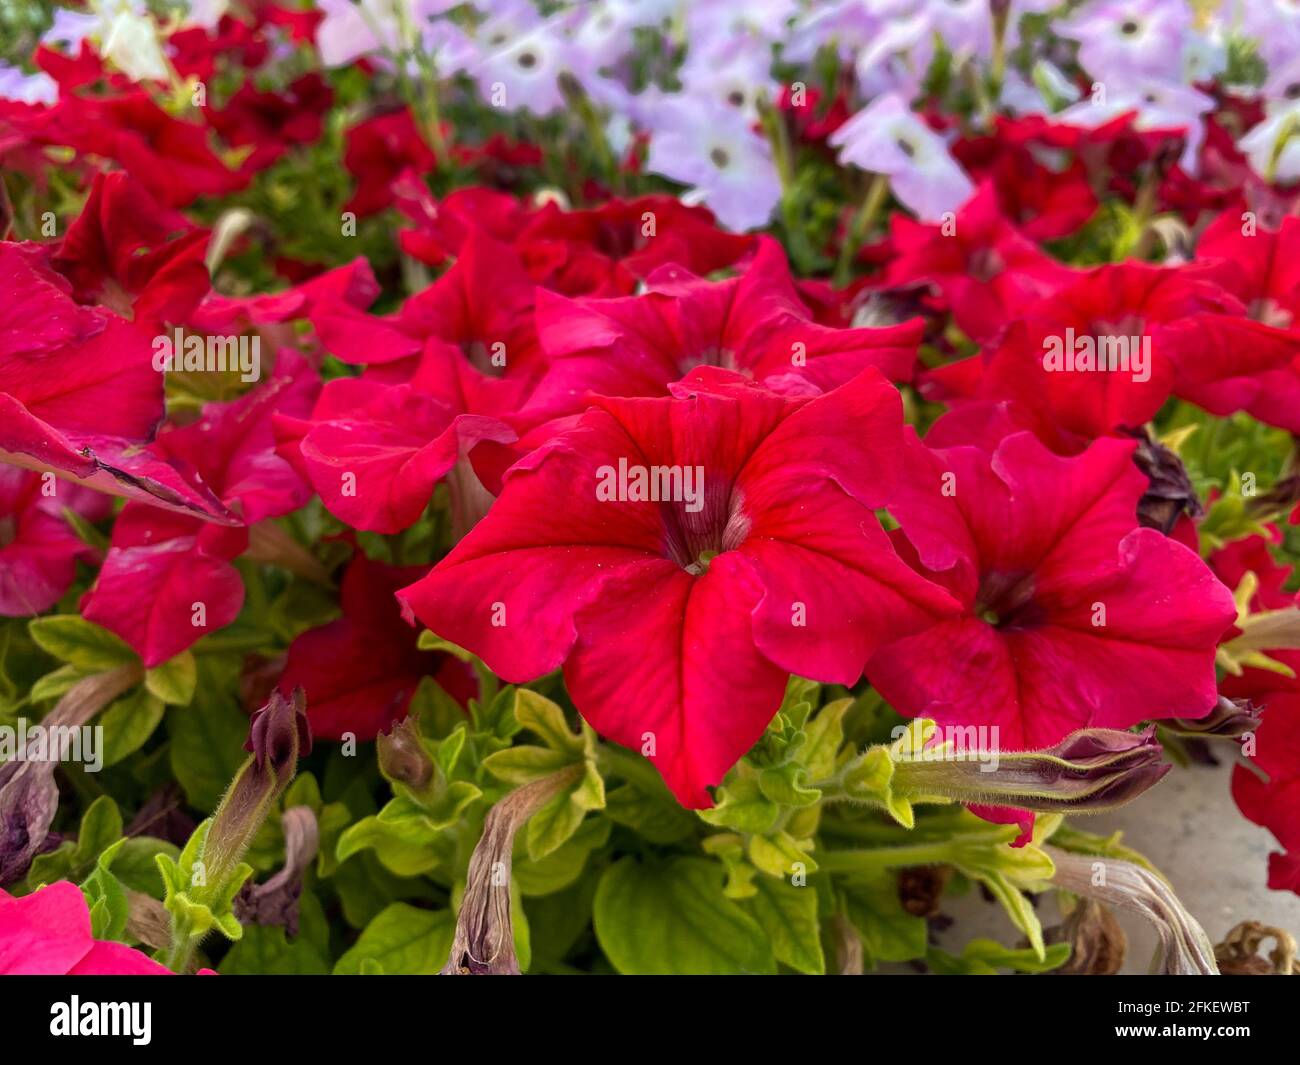 Bright red flower, Wild petunia (ruellia) hybrid close up on a plant in the sunshine. Stock Photo